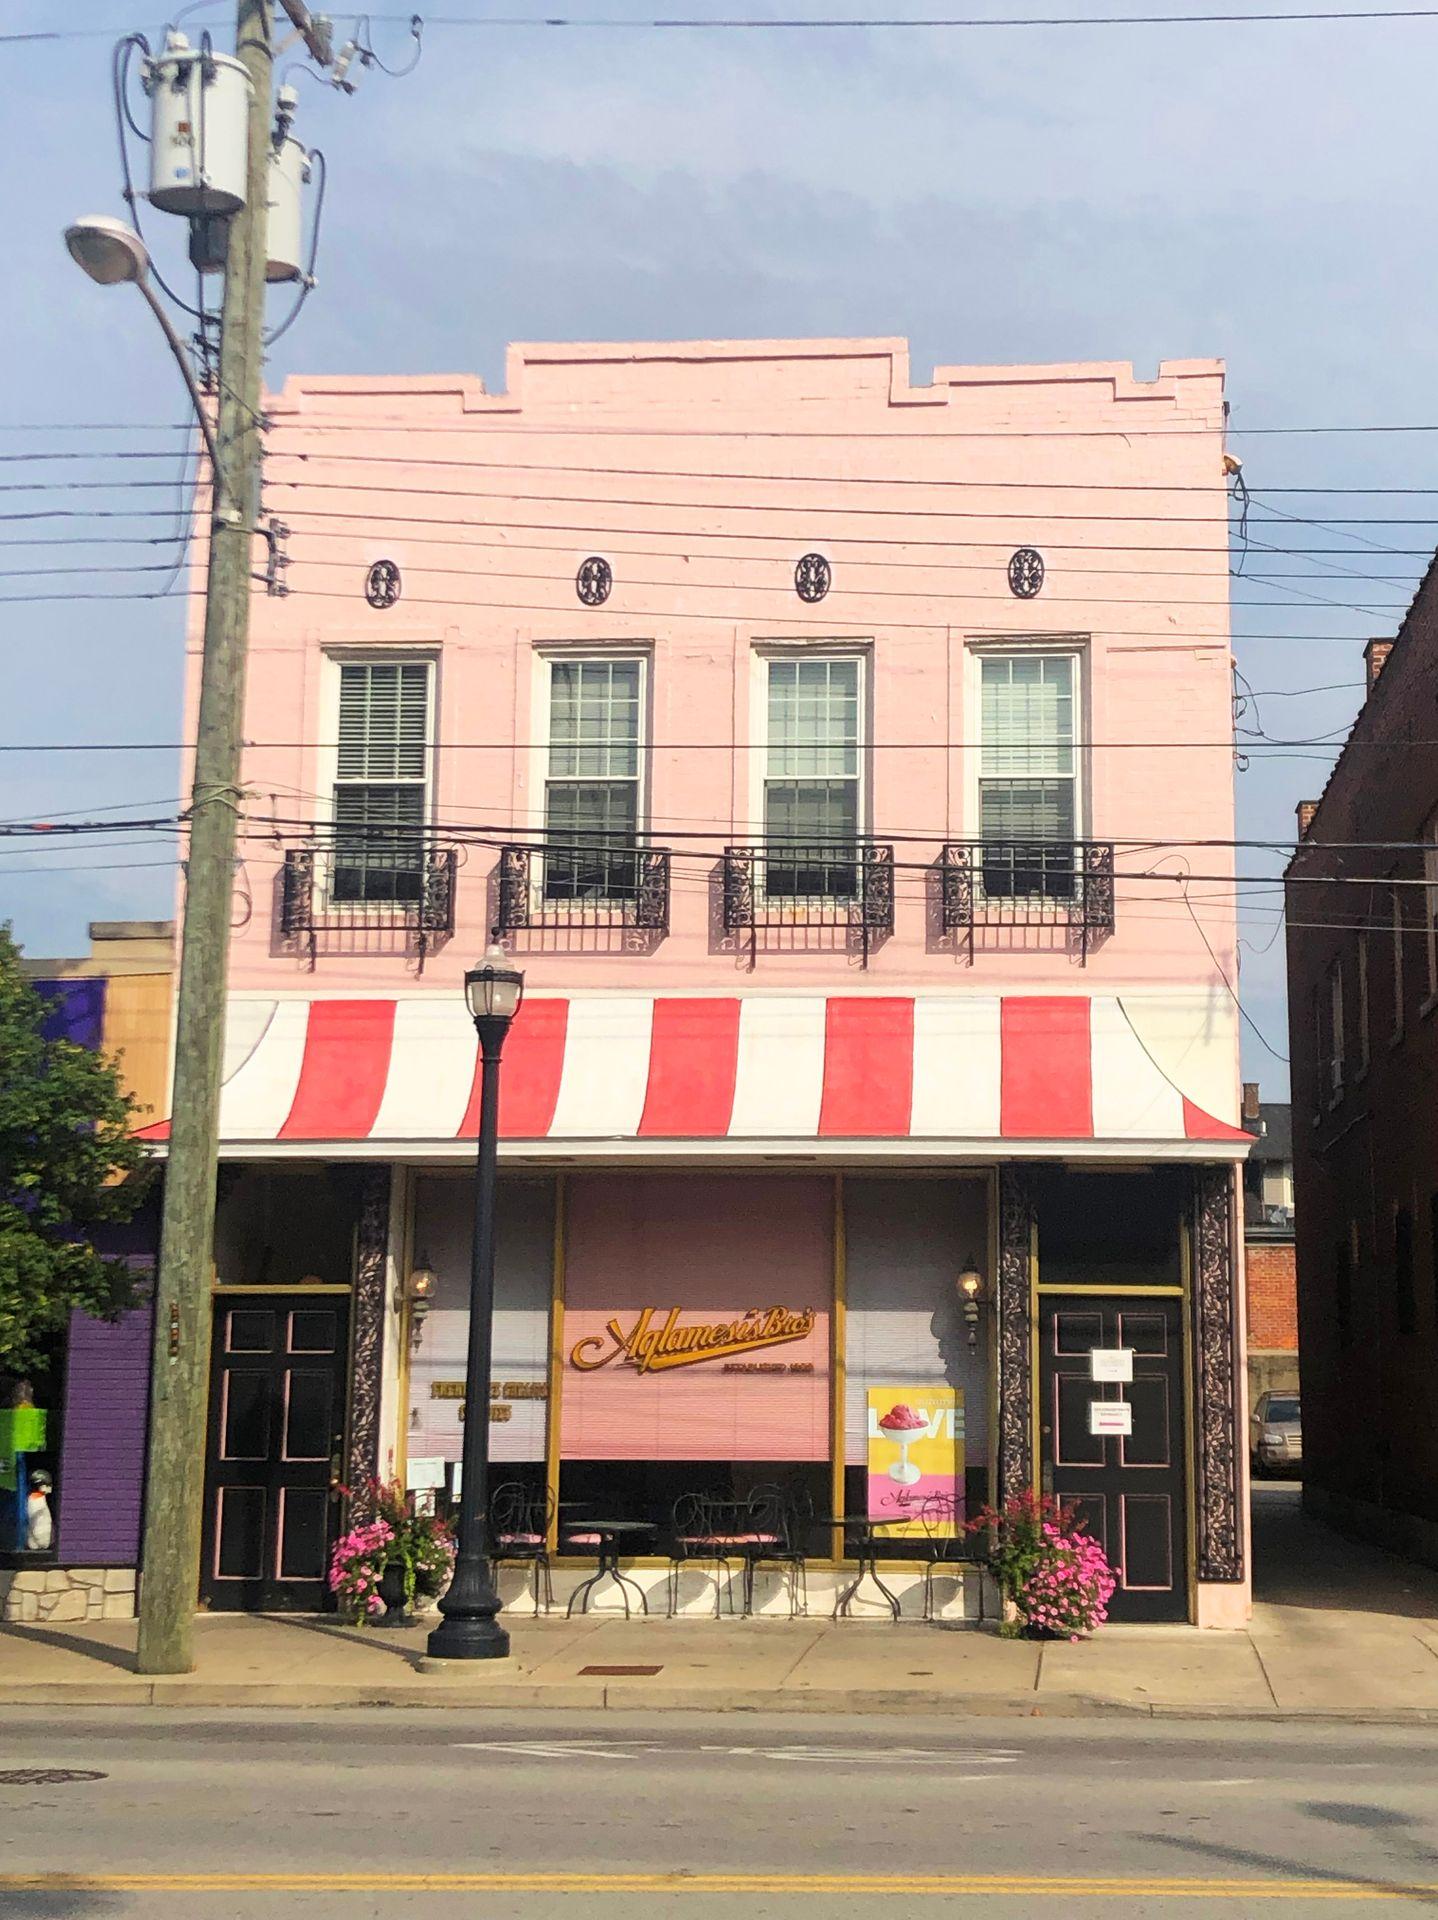 A photo of the Aglamesis Bros exterior. The building is pink with a pink and white striped awning.